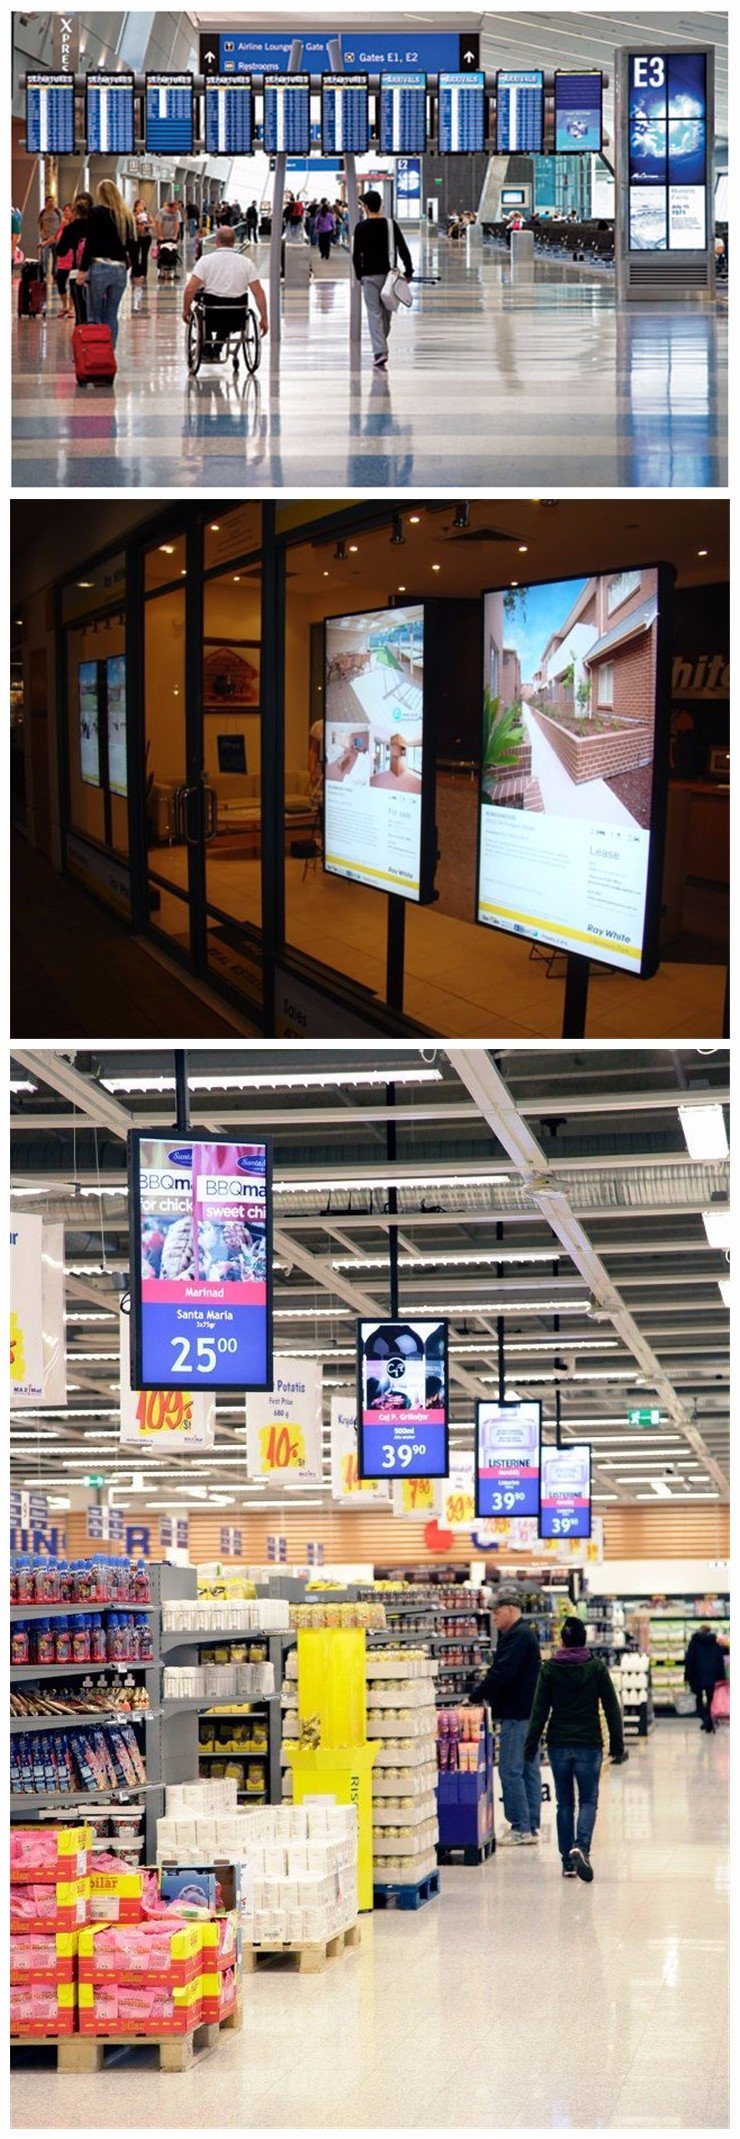 21.5 Inch Wall Advertising Screen Ad Player Floor Standing Ice Cream Kiosk Digital Advertising Screens for Sale LCD Digital Signage with ISO9001 Certificates